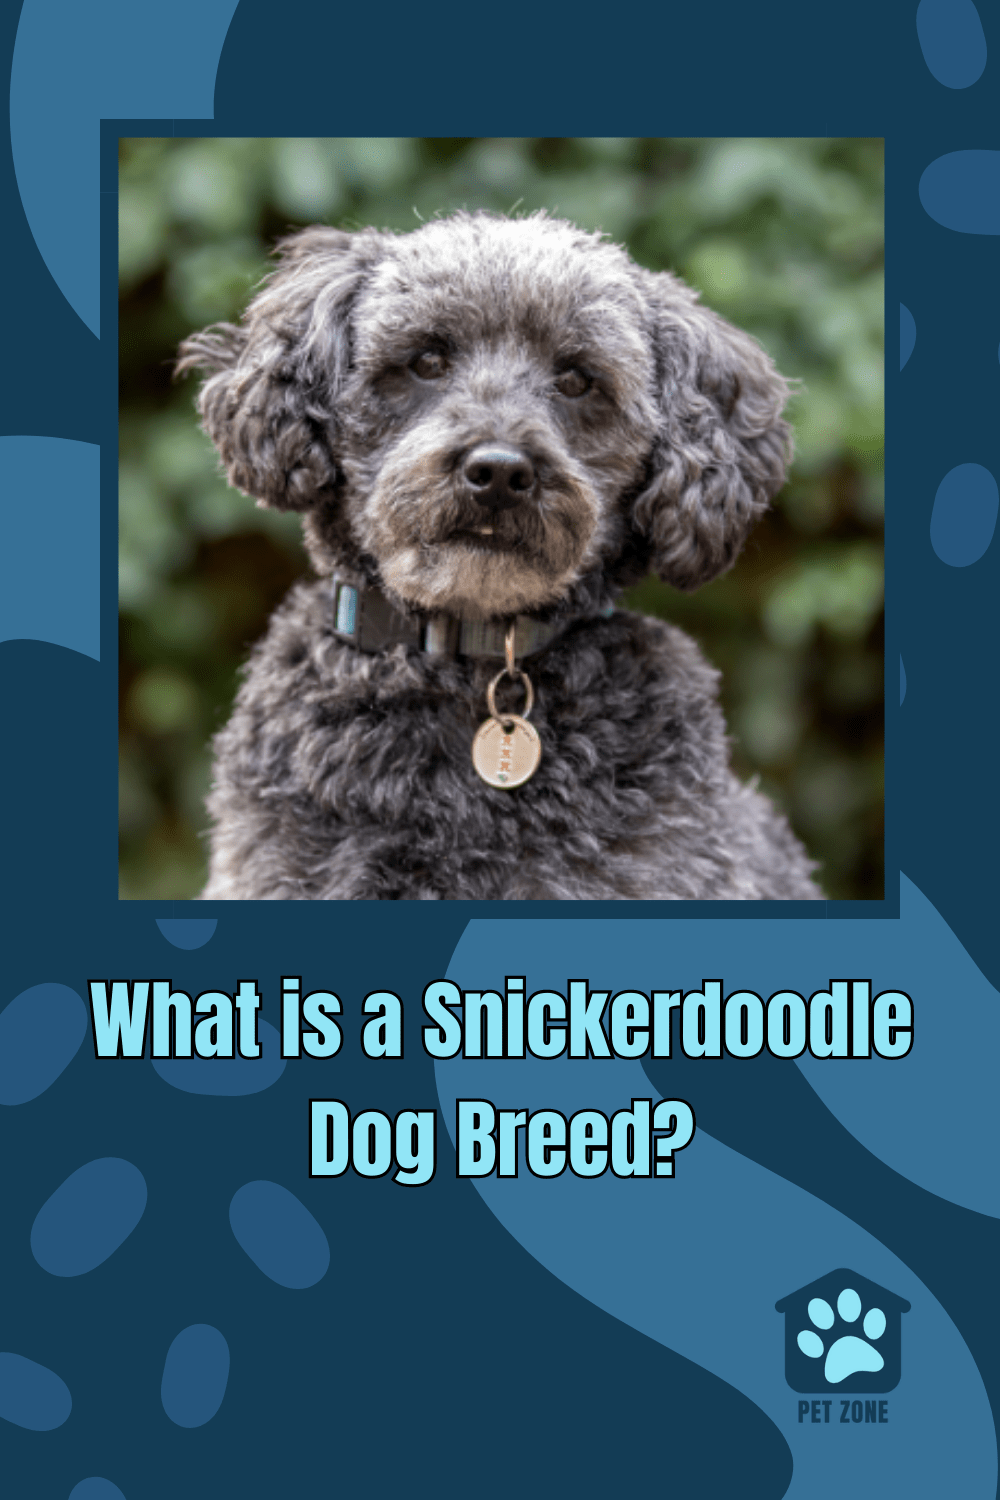 What is a Snickerdoodle Dog Breed?